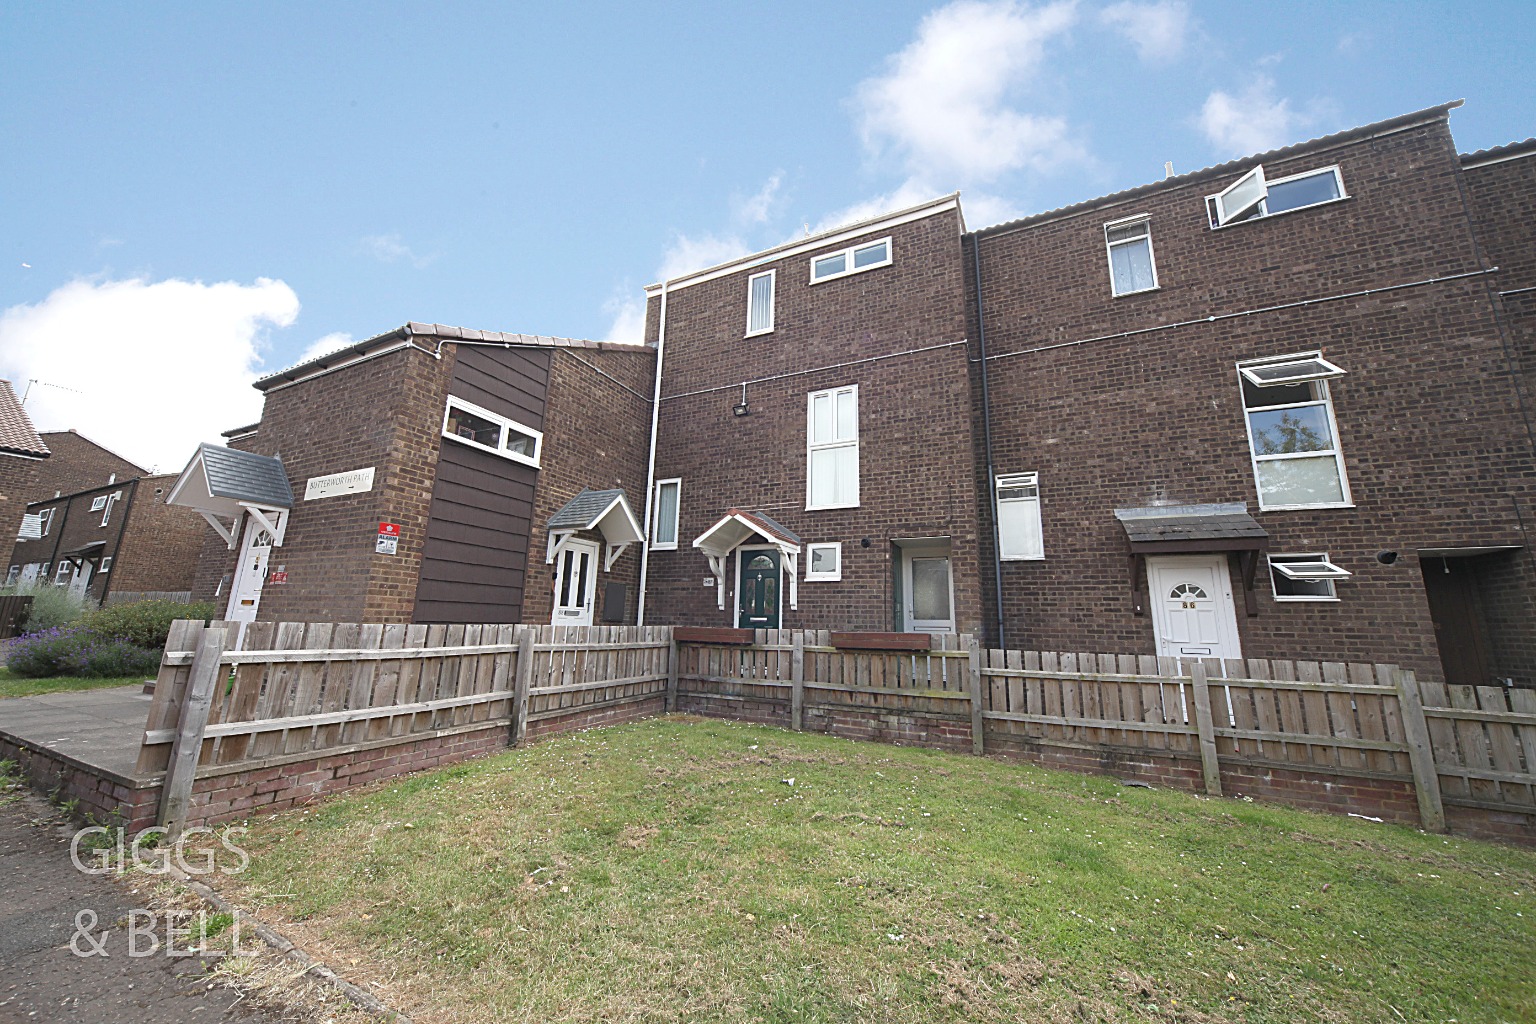 3 bed town house for sale in Butterworth Path, Luton, LU2 